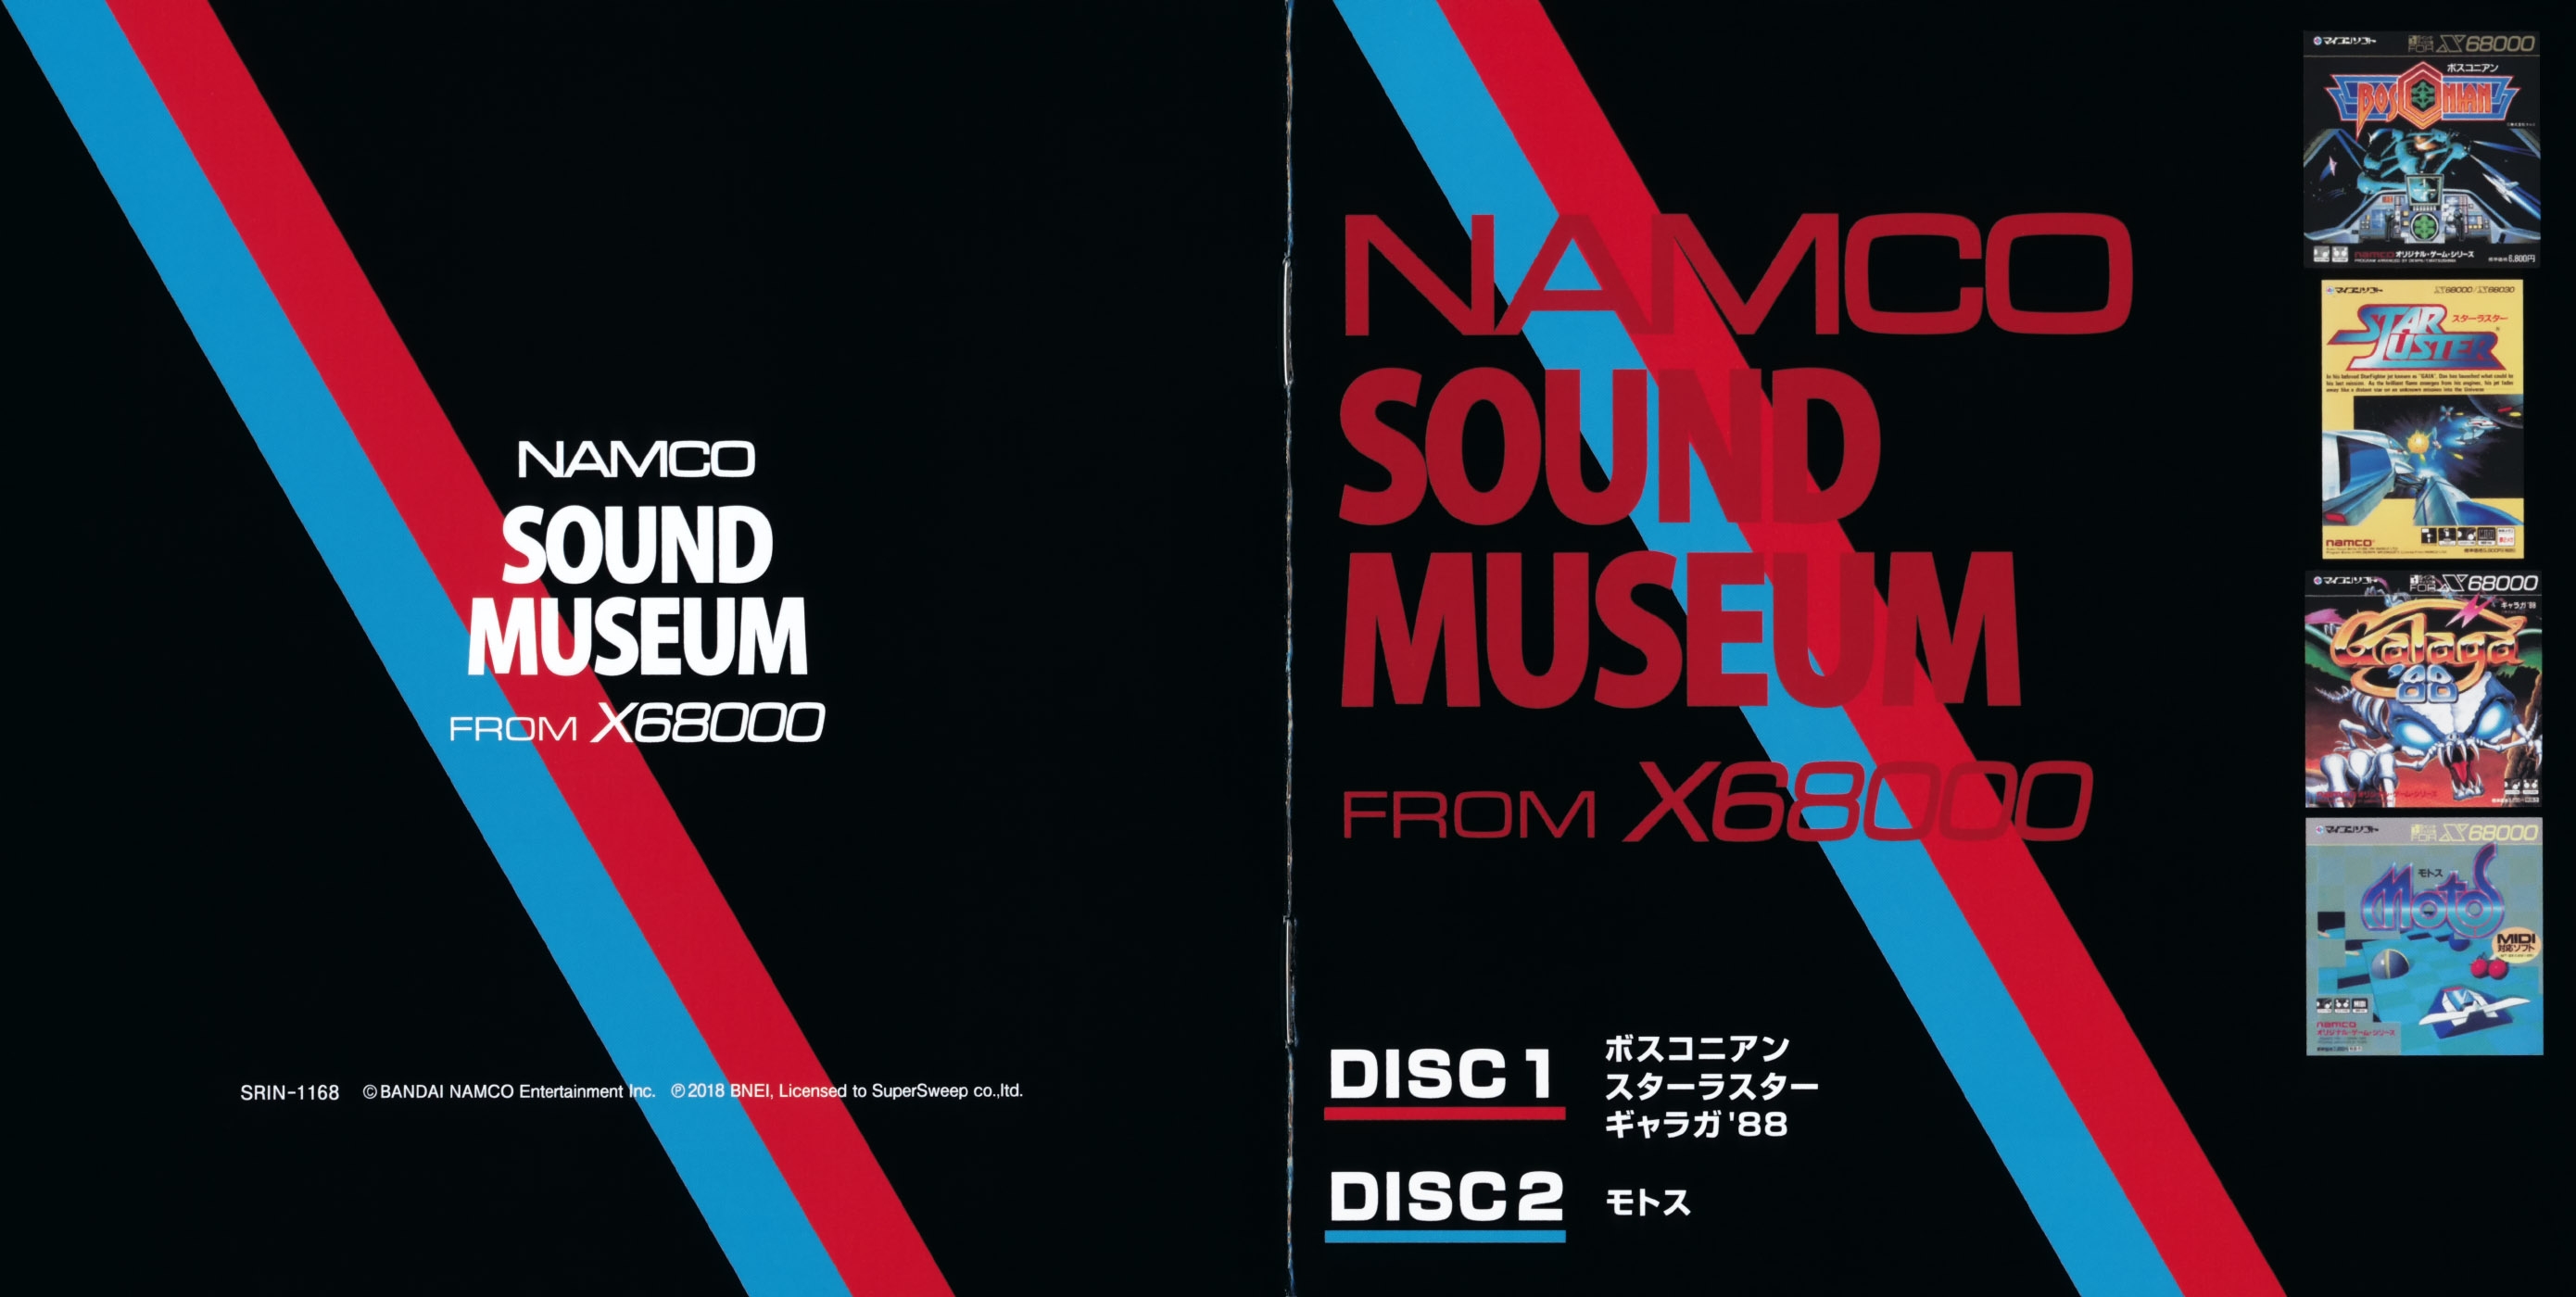 NAMCO SOUND MUSEUM from X68000 (2018) MP3 - Download NAMCO SOUND MUSEUM  from X68000 (2018) Soundtracks for FREE!